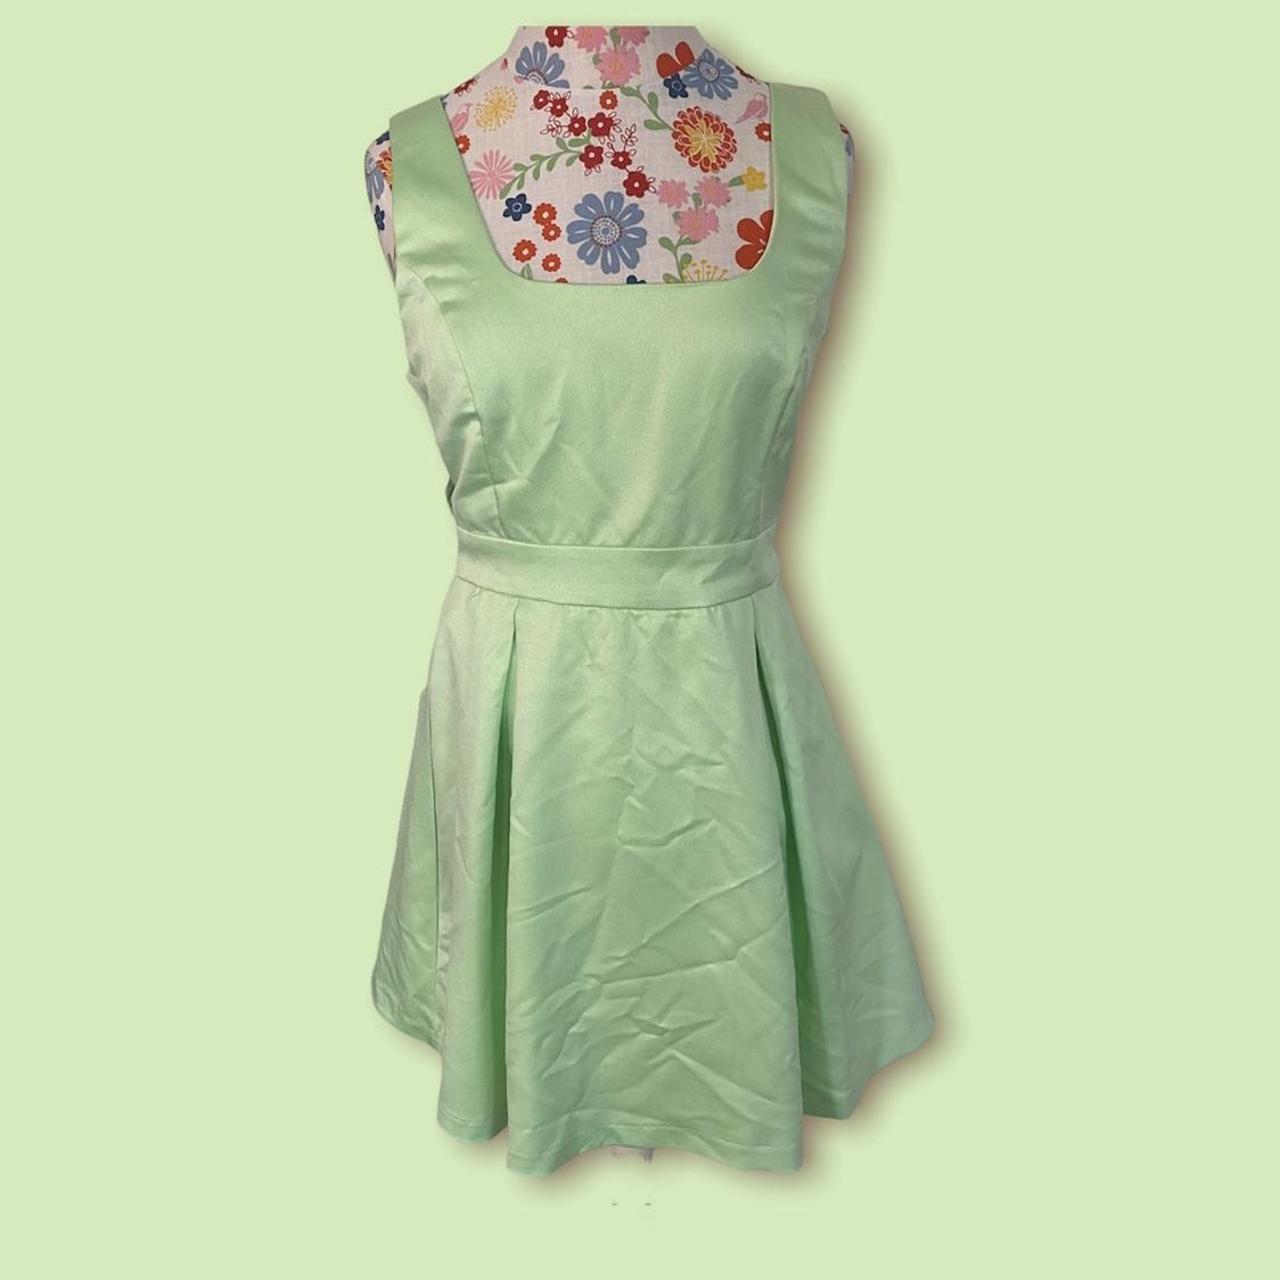 Product Image 1 - NWT Tinkerbell Dress
A little green